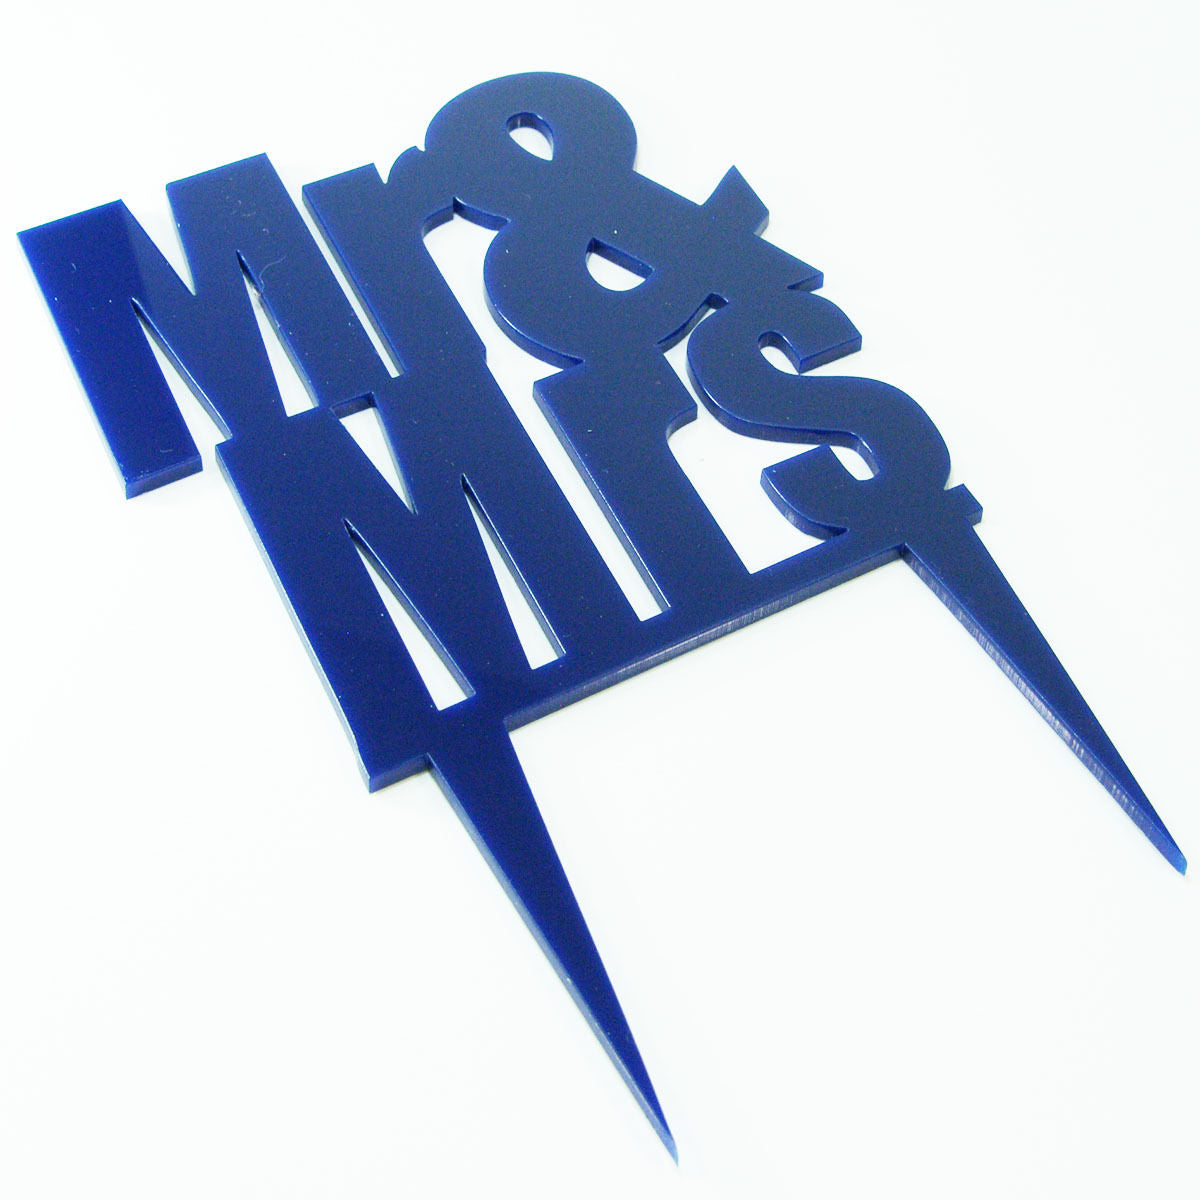 Mr and Mrs Proposal Wedding Engagement Cake Decoration Topper Acrylic Written